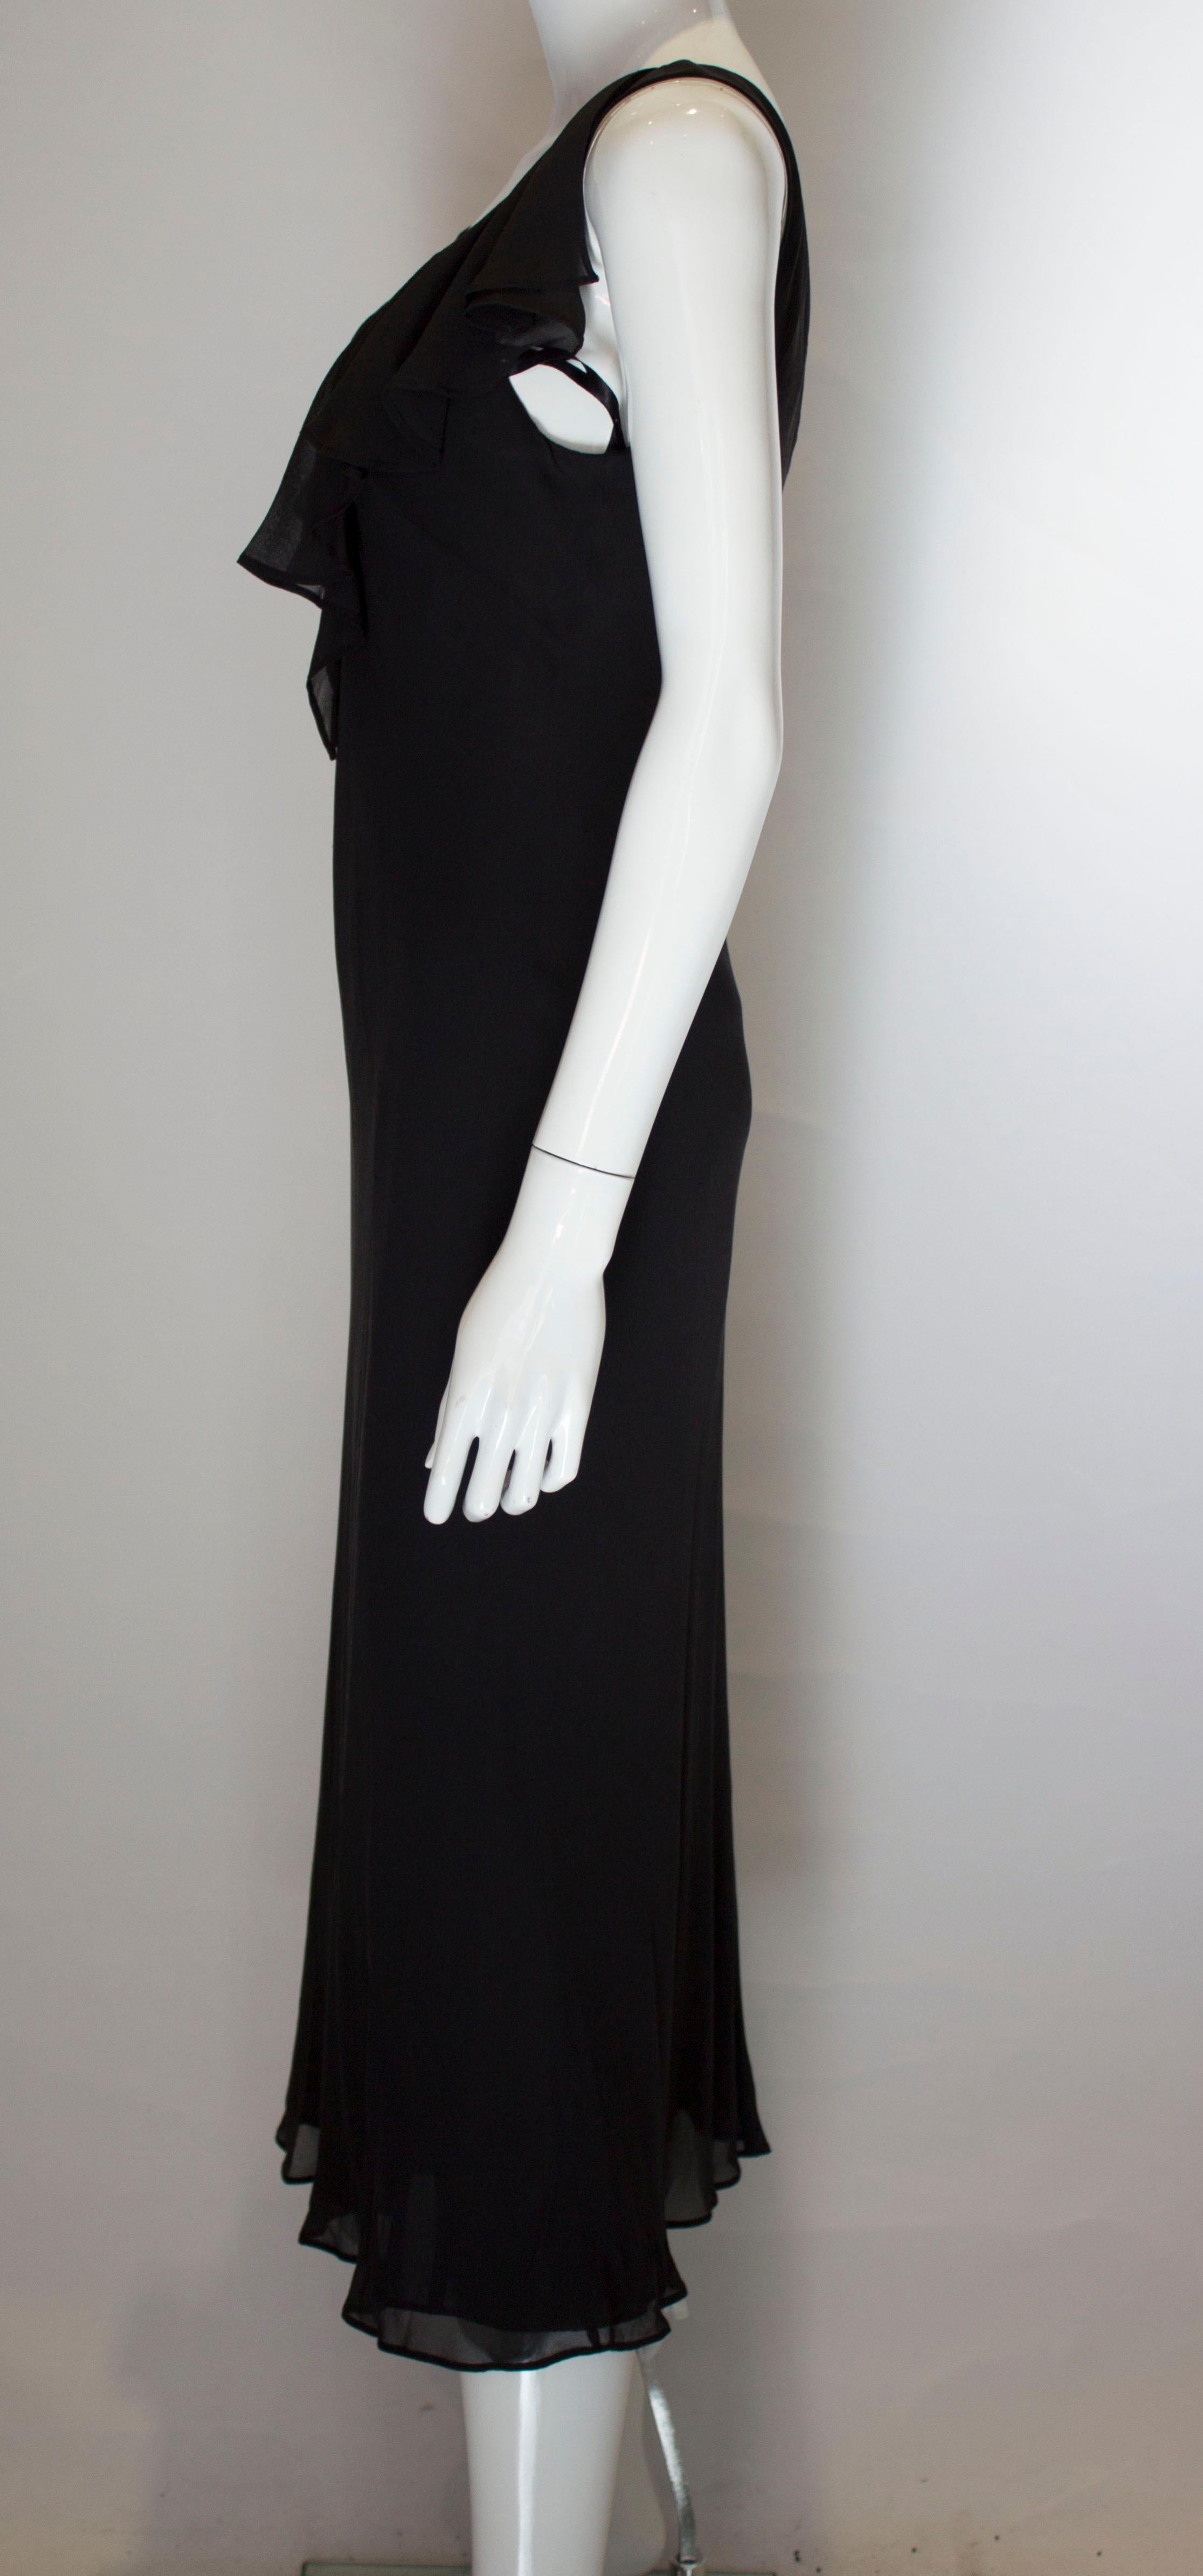 Vintage Slip Dress with Ruffle at Neckline For Sale 1